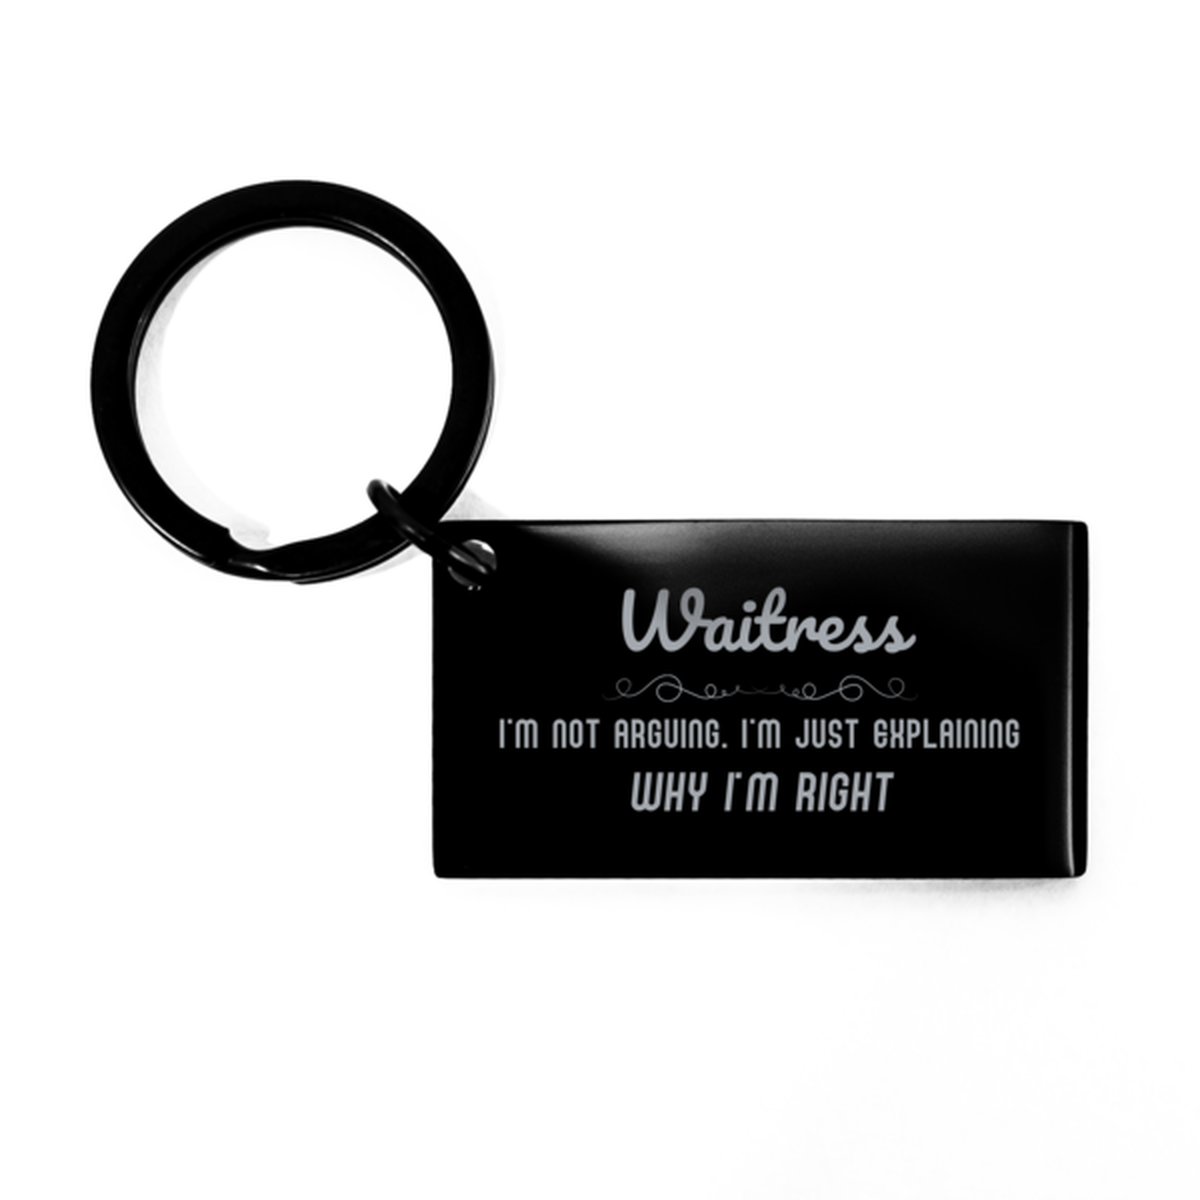 Waitress I'm not Arguing. I'm Just Explaining Why I'm RIGHT Keychain, Funny Saying Quote Waitress Gifts For Waitress Graduation Birthday Christmas Gifts for Men Women Coworker